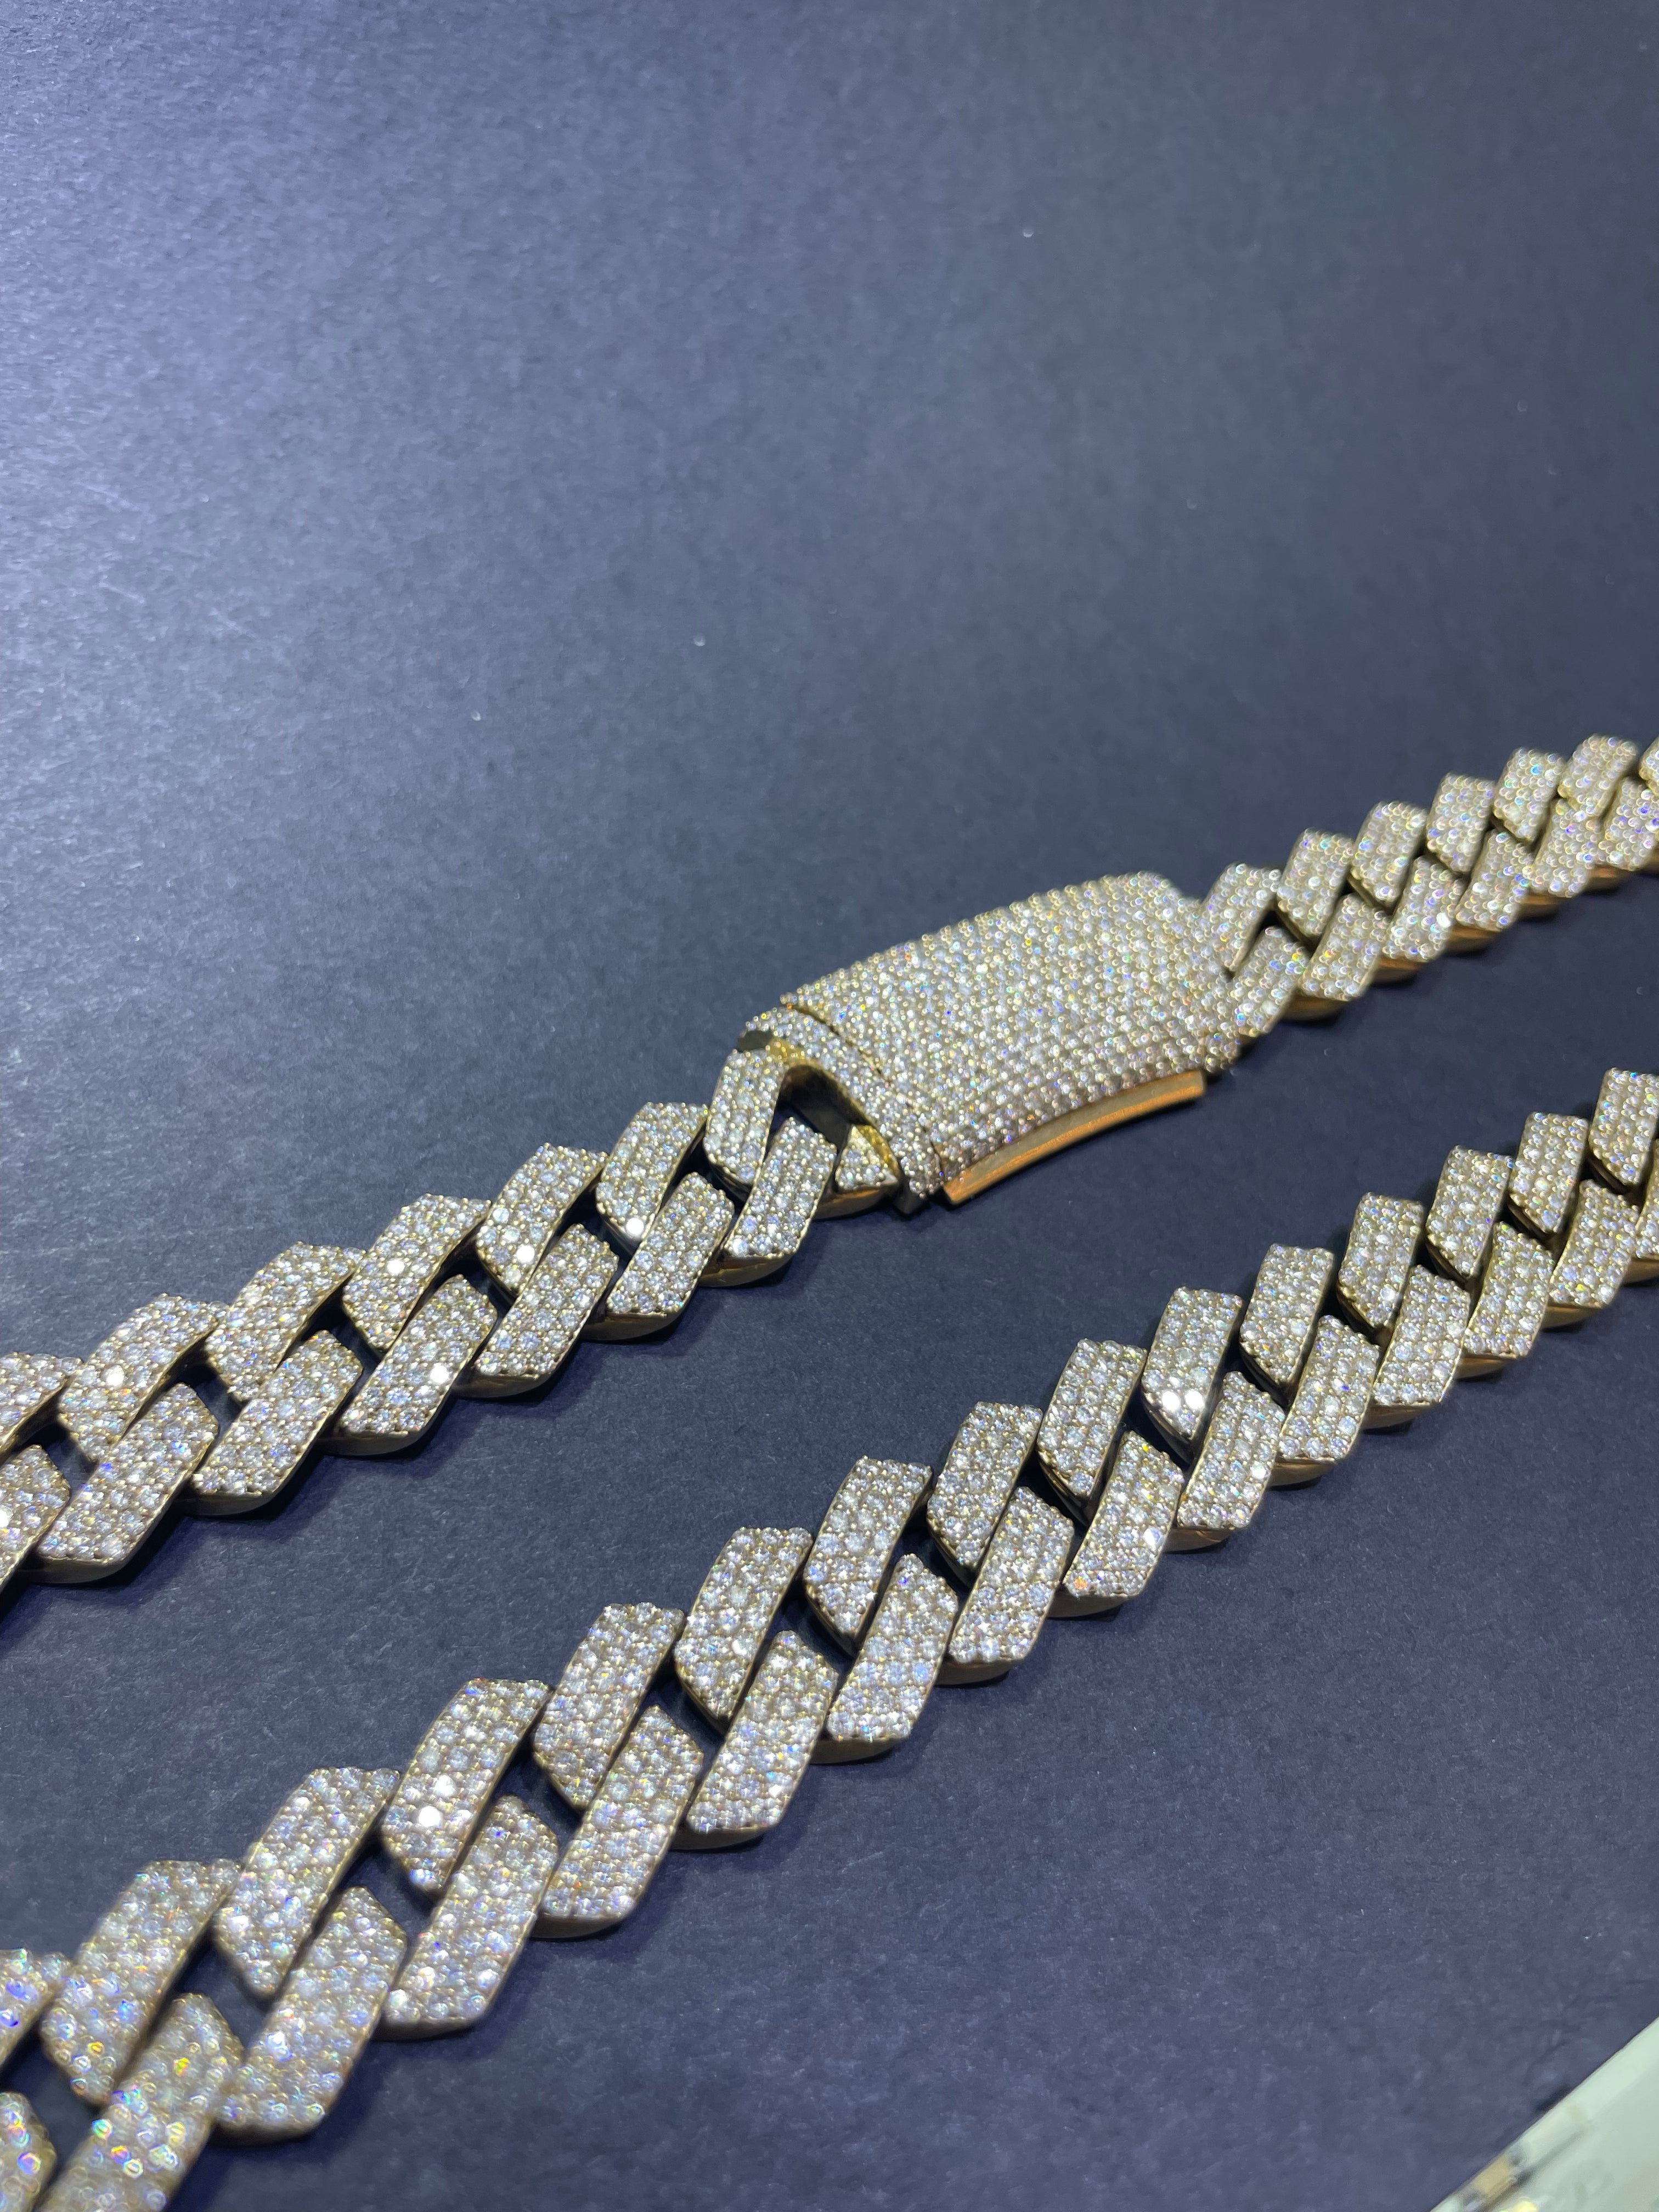 10k Iced Out "Bust Down Miami Cuban Link Chain" 45 Cts Natural VVS1 Diamonds💎 (G-Color) 273 grams of 10k Gold 17.5mm, 22 inches